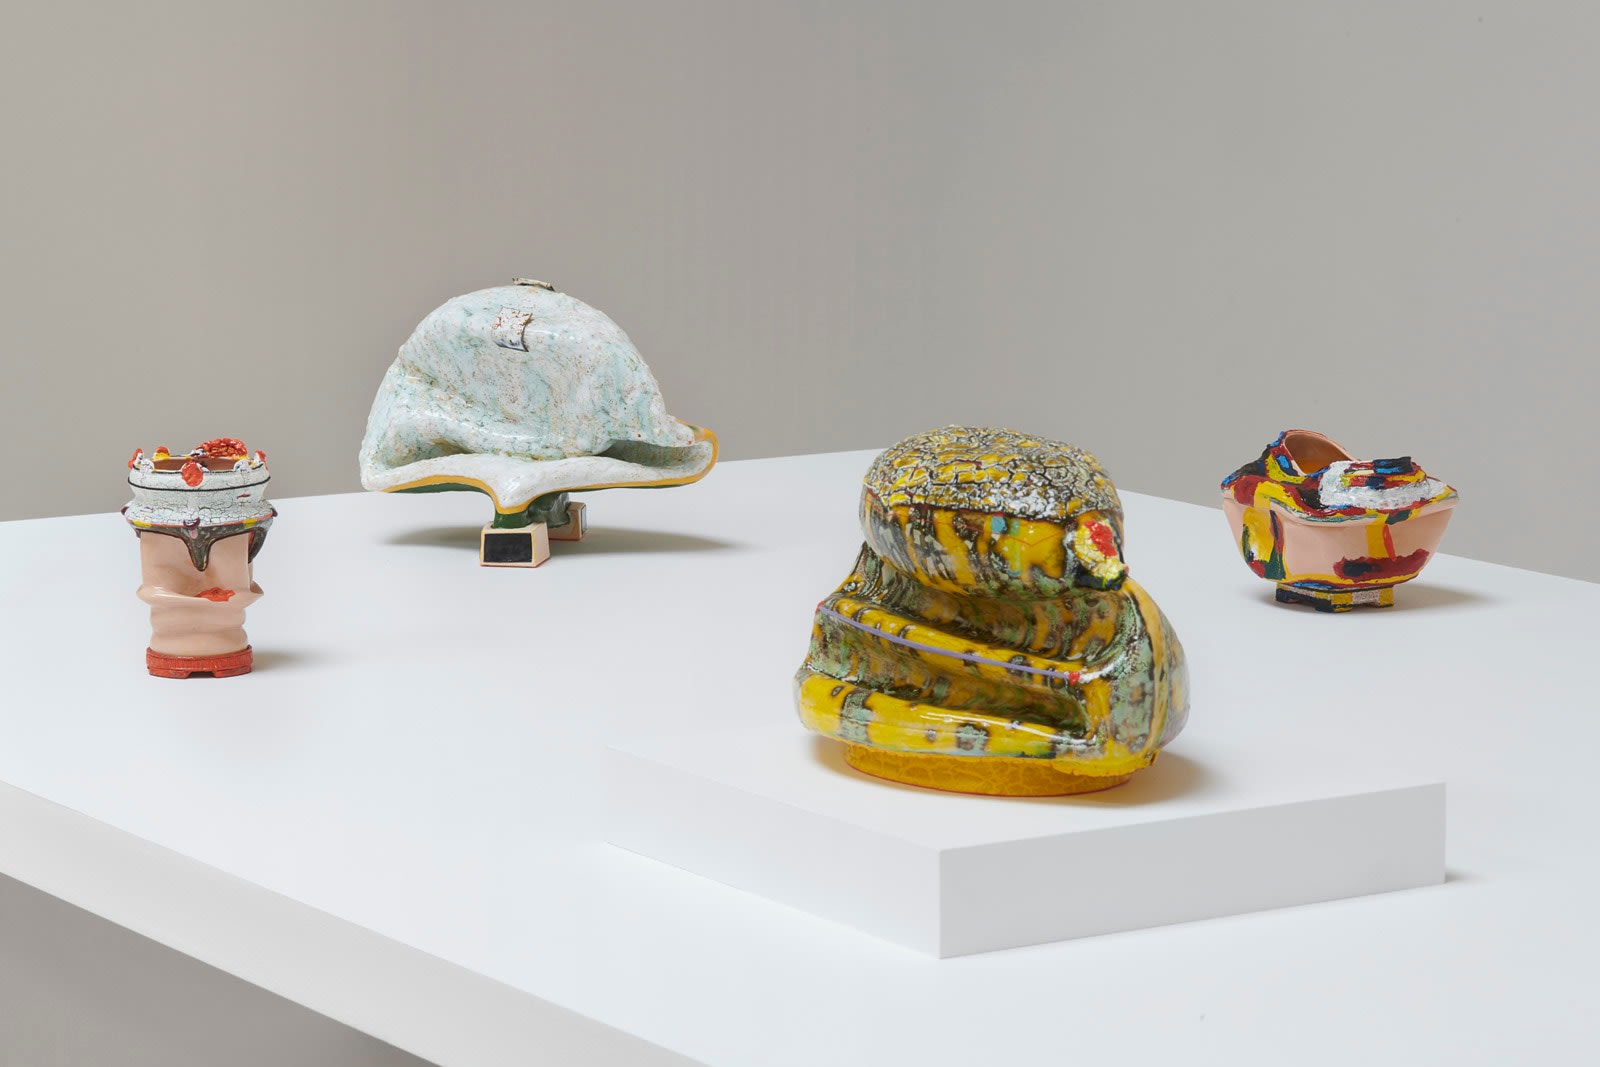 installation view of four sculptures